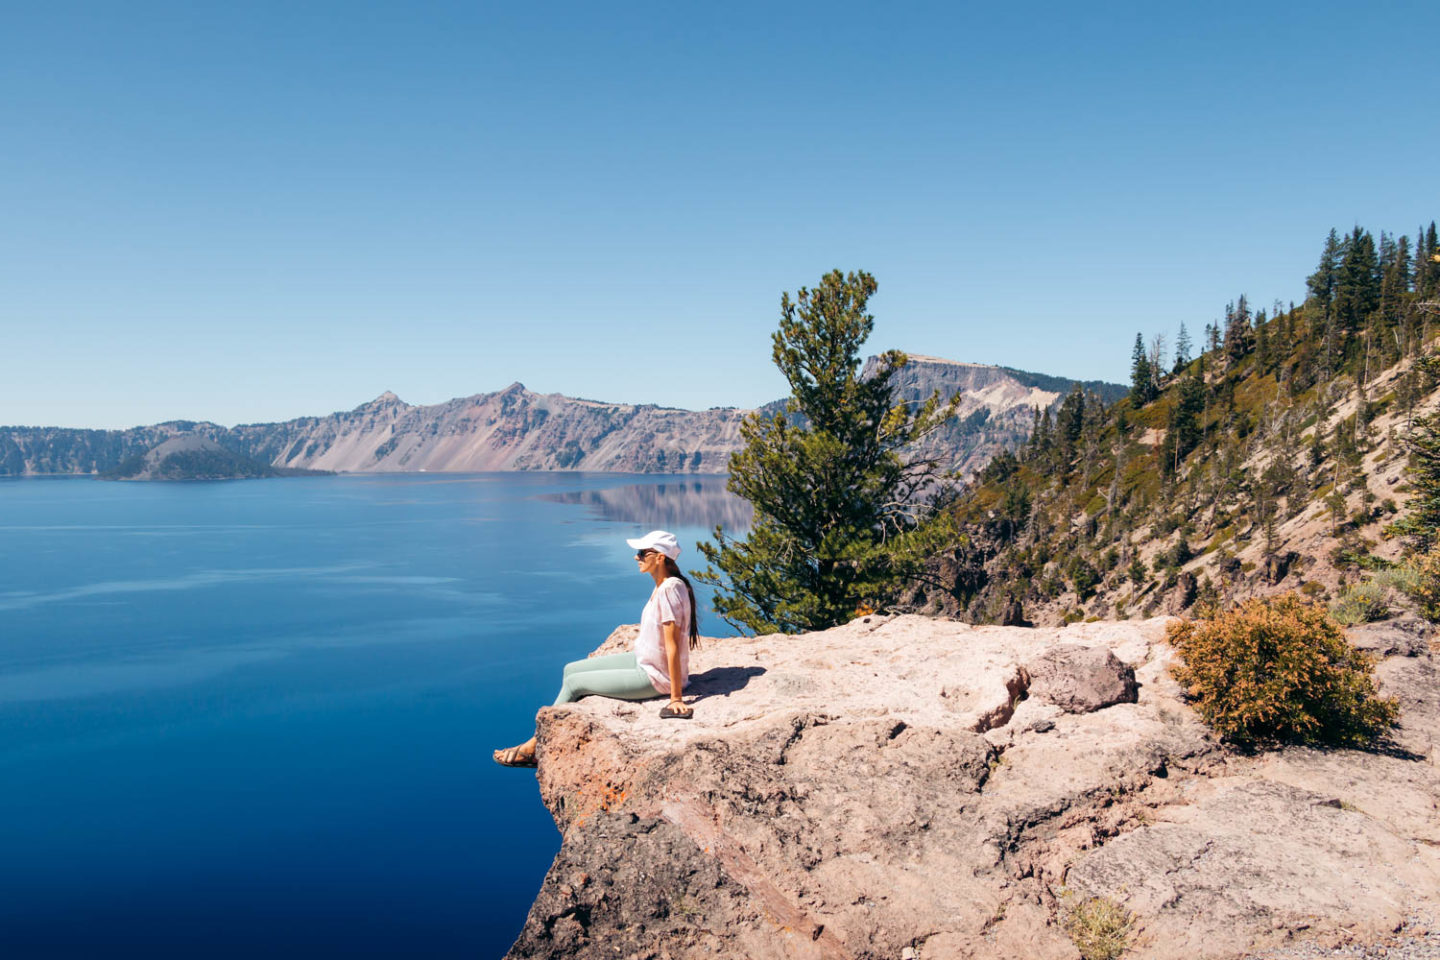 One day in Crater Lake - Roads and Destinations